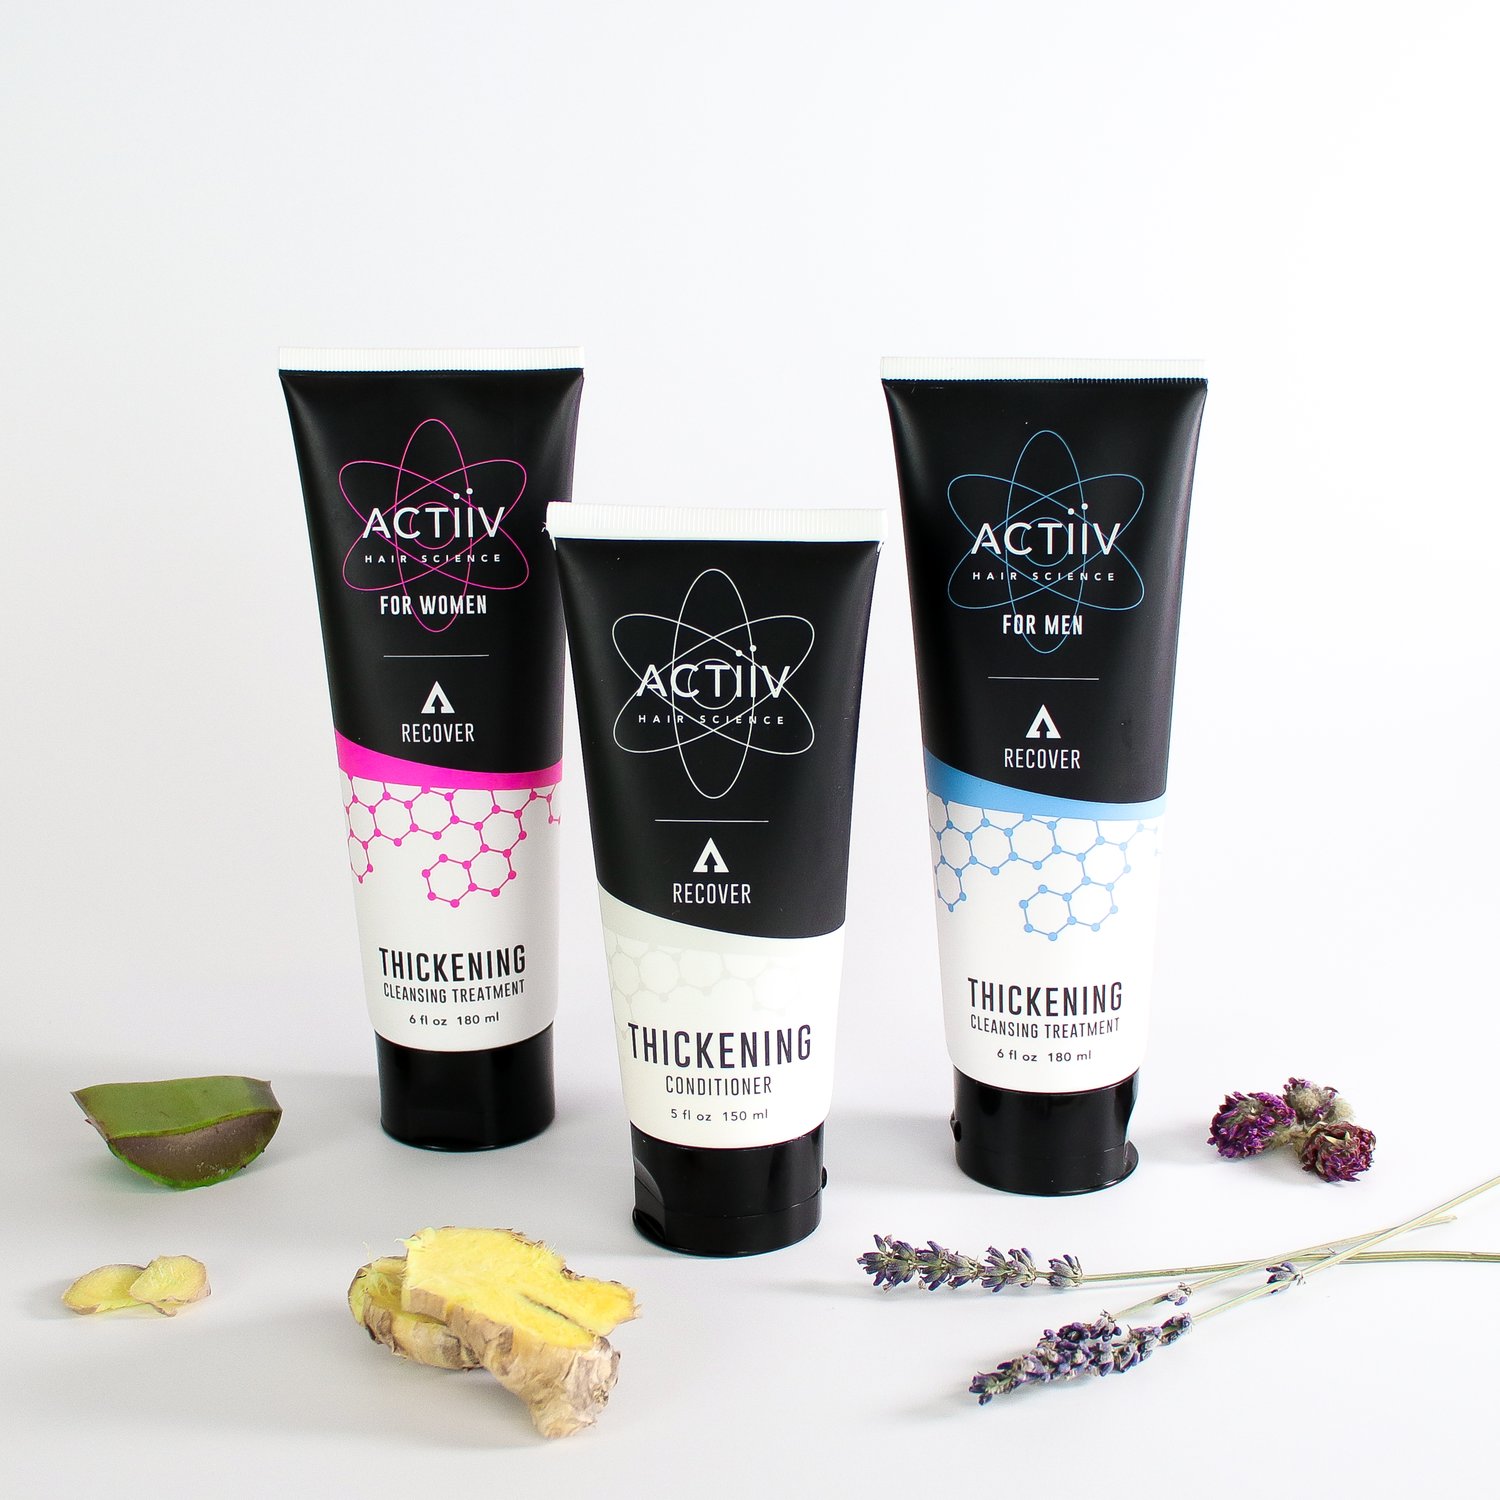 Actiiv recover surounded with fresh ingredients